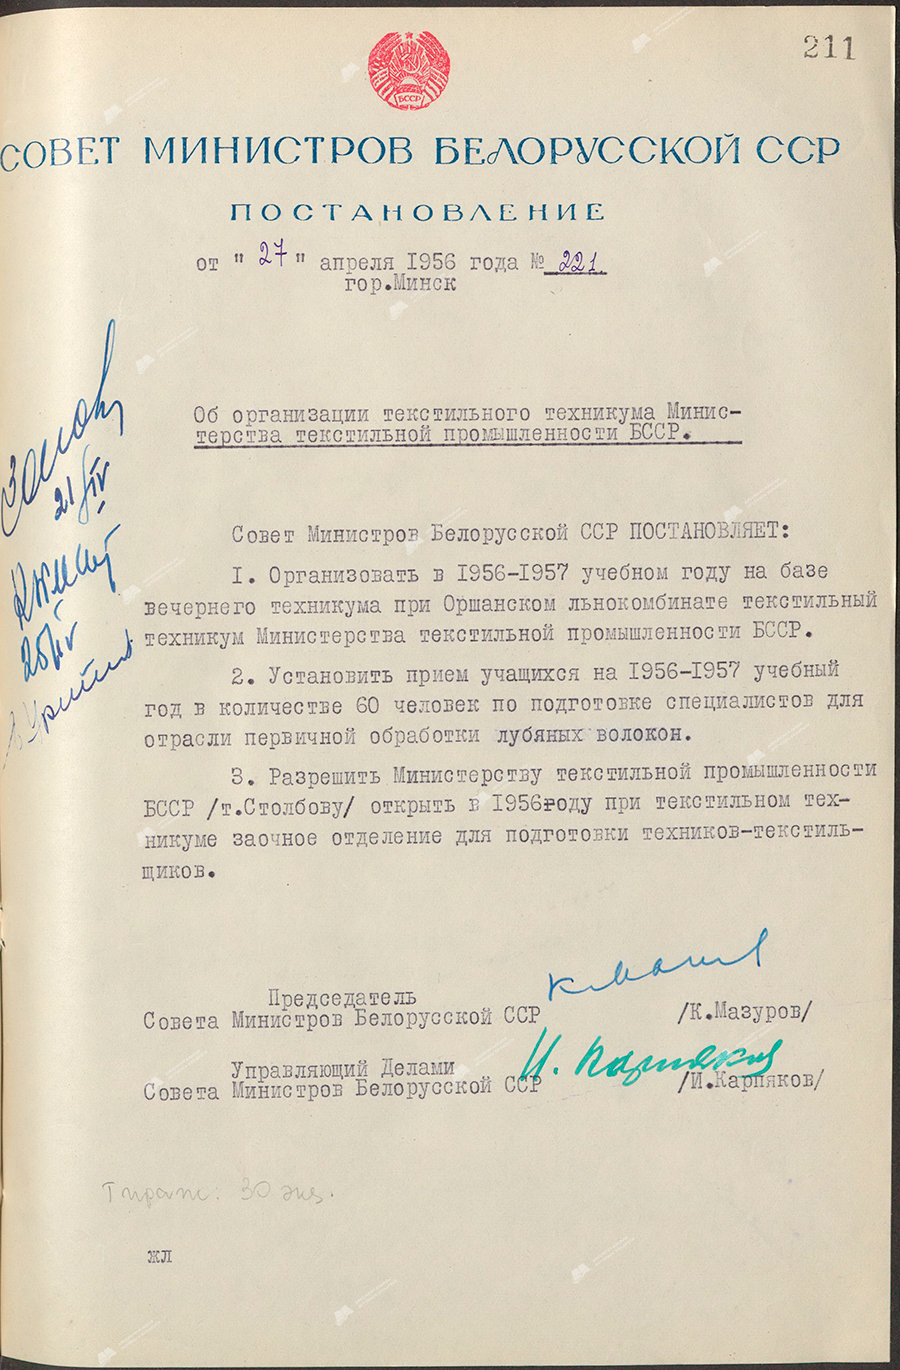 Resolution No. 221 of the Council of Ministers of the Byelorussian SSR «On the organization of the textile technical school of the Ministry of Textile Industry of the BSSR»-с. 0